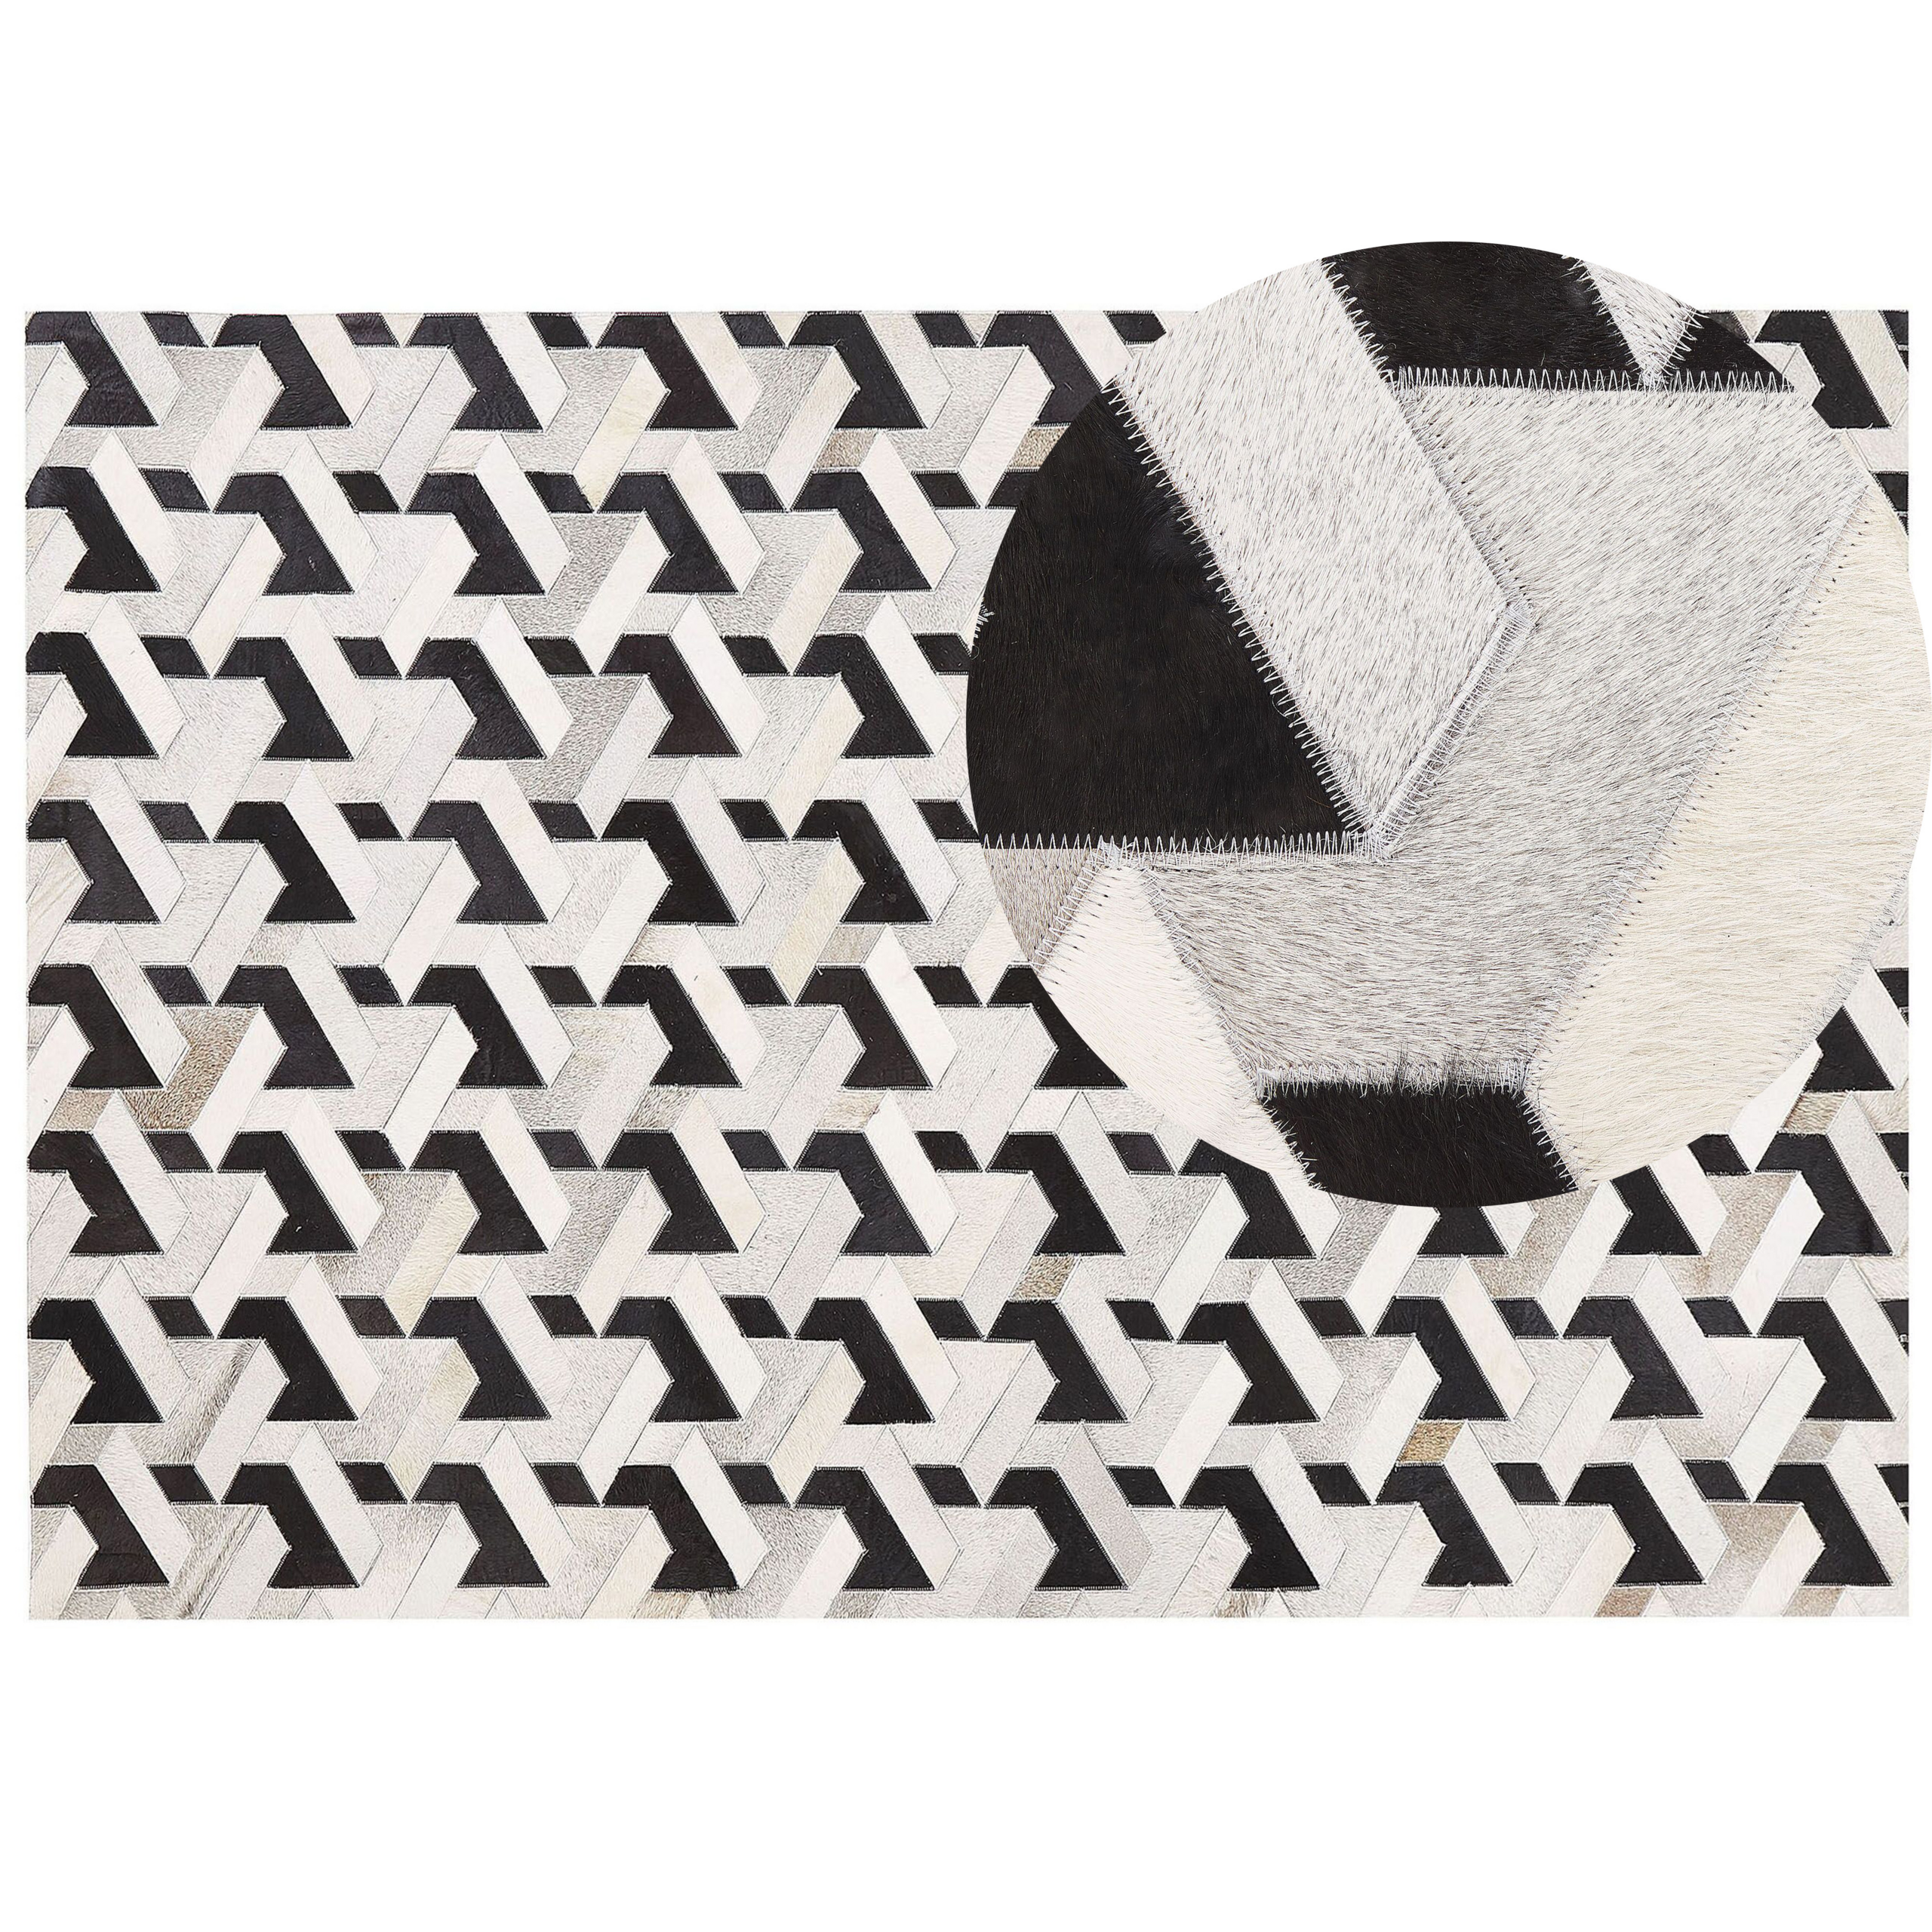 Beliani Area Rug Black and White Cowhide Leather 160 x 230 cm Geometric Pattern Patchwork